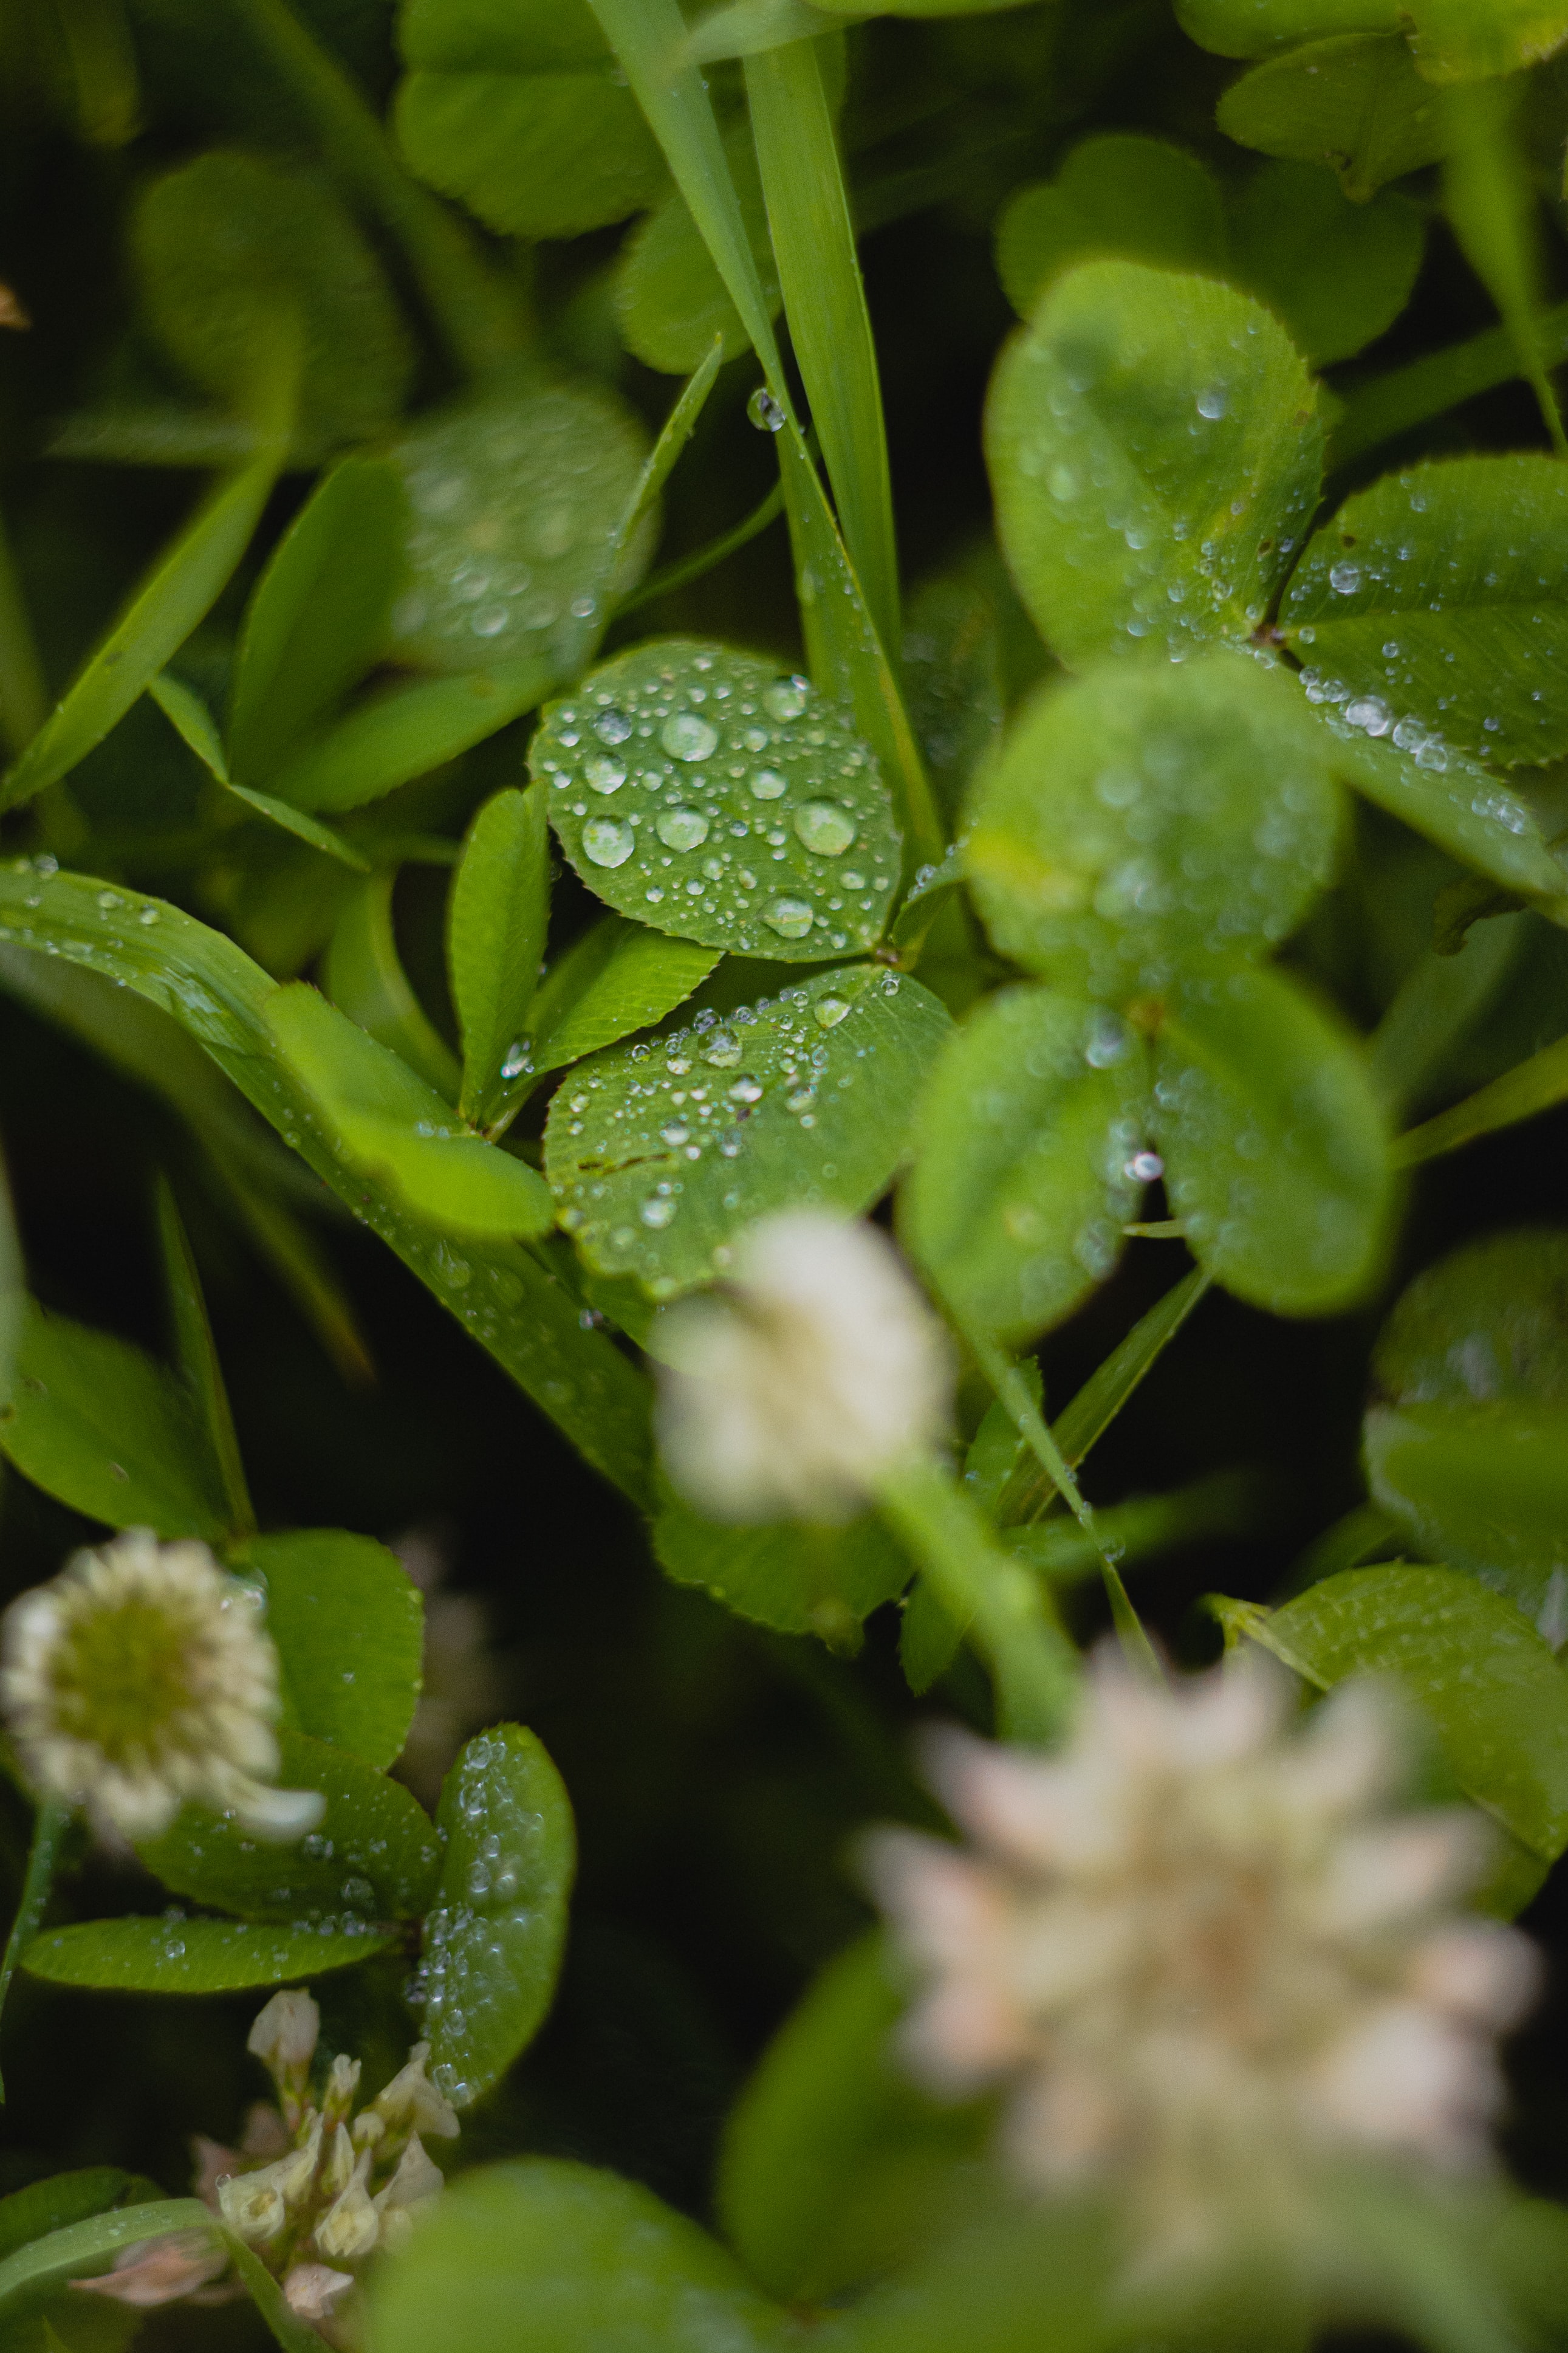 74003 download wallpaper water, leaves, drops, macro, wet, clover screensavers and pictures for free